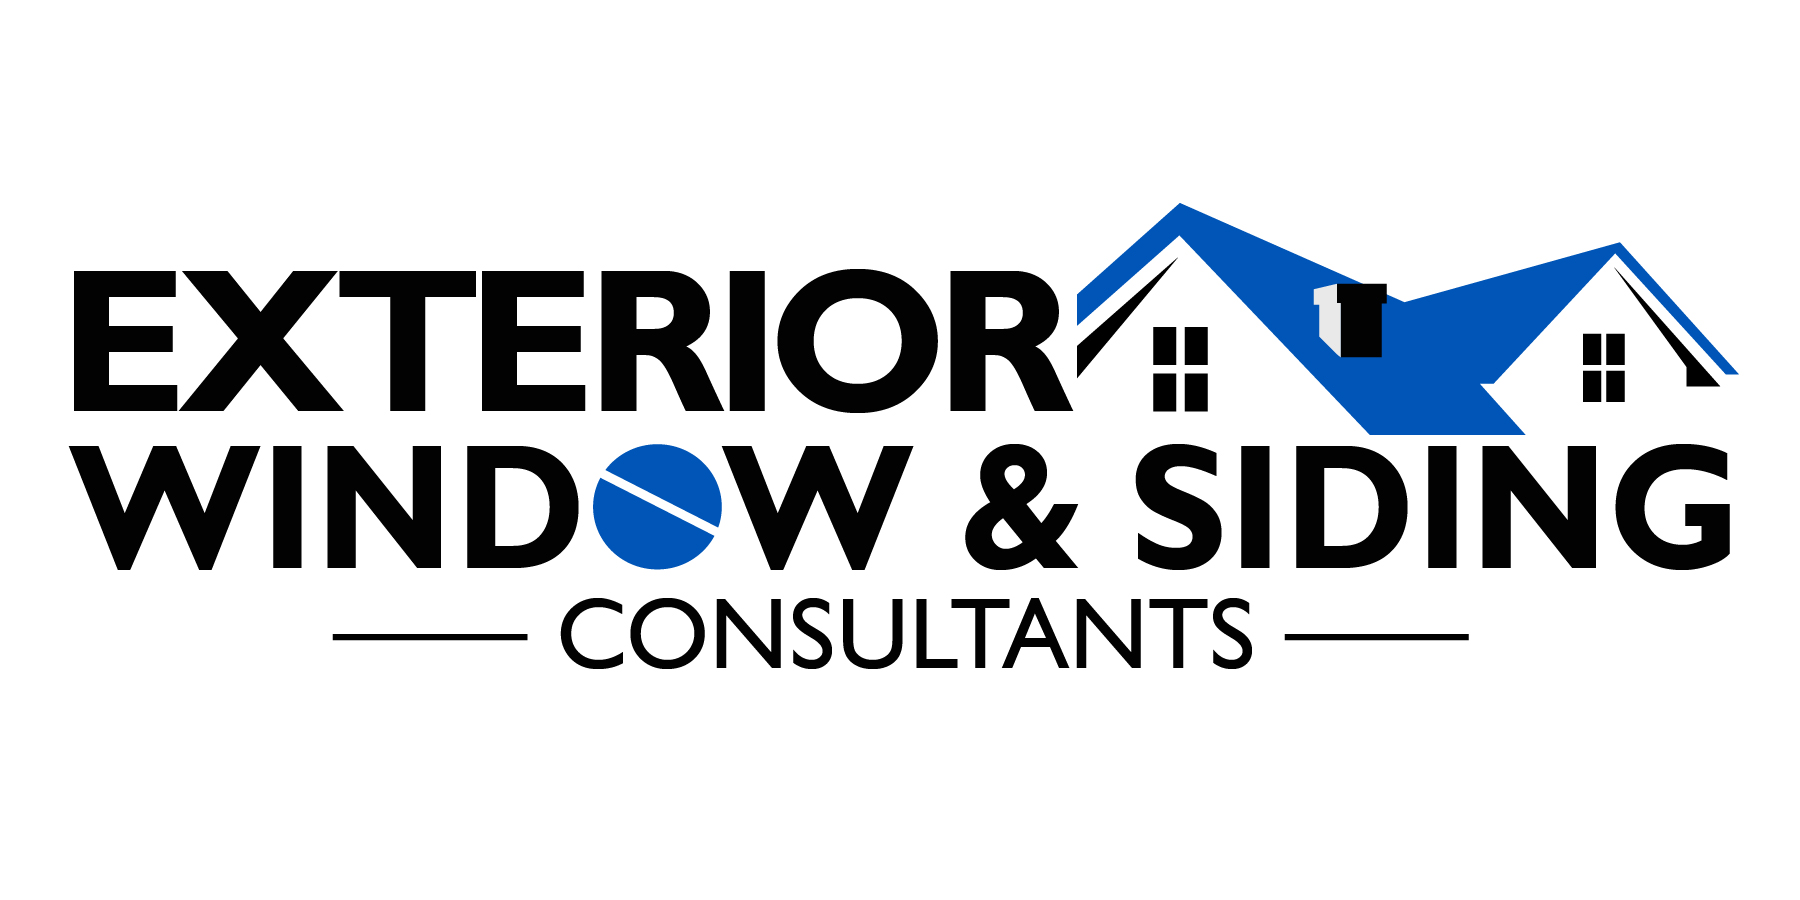 Exterior Windows and Siding Consultants